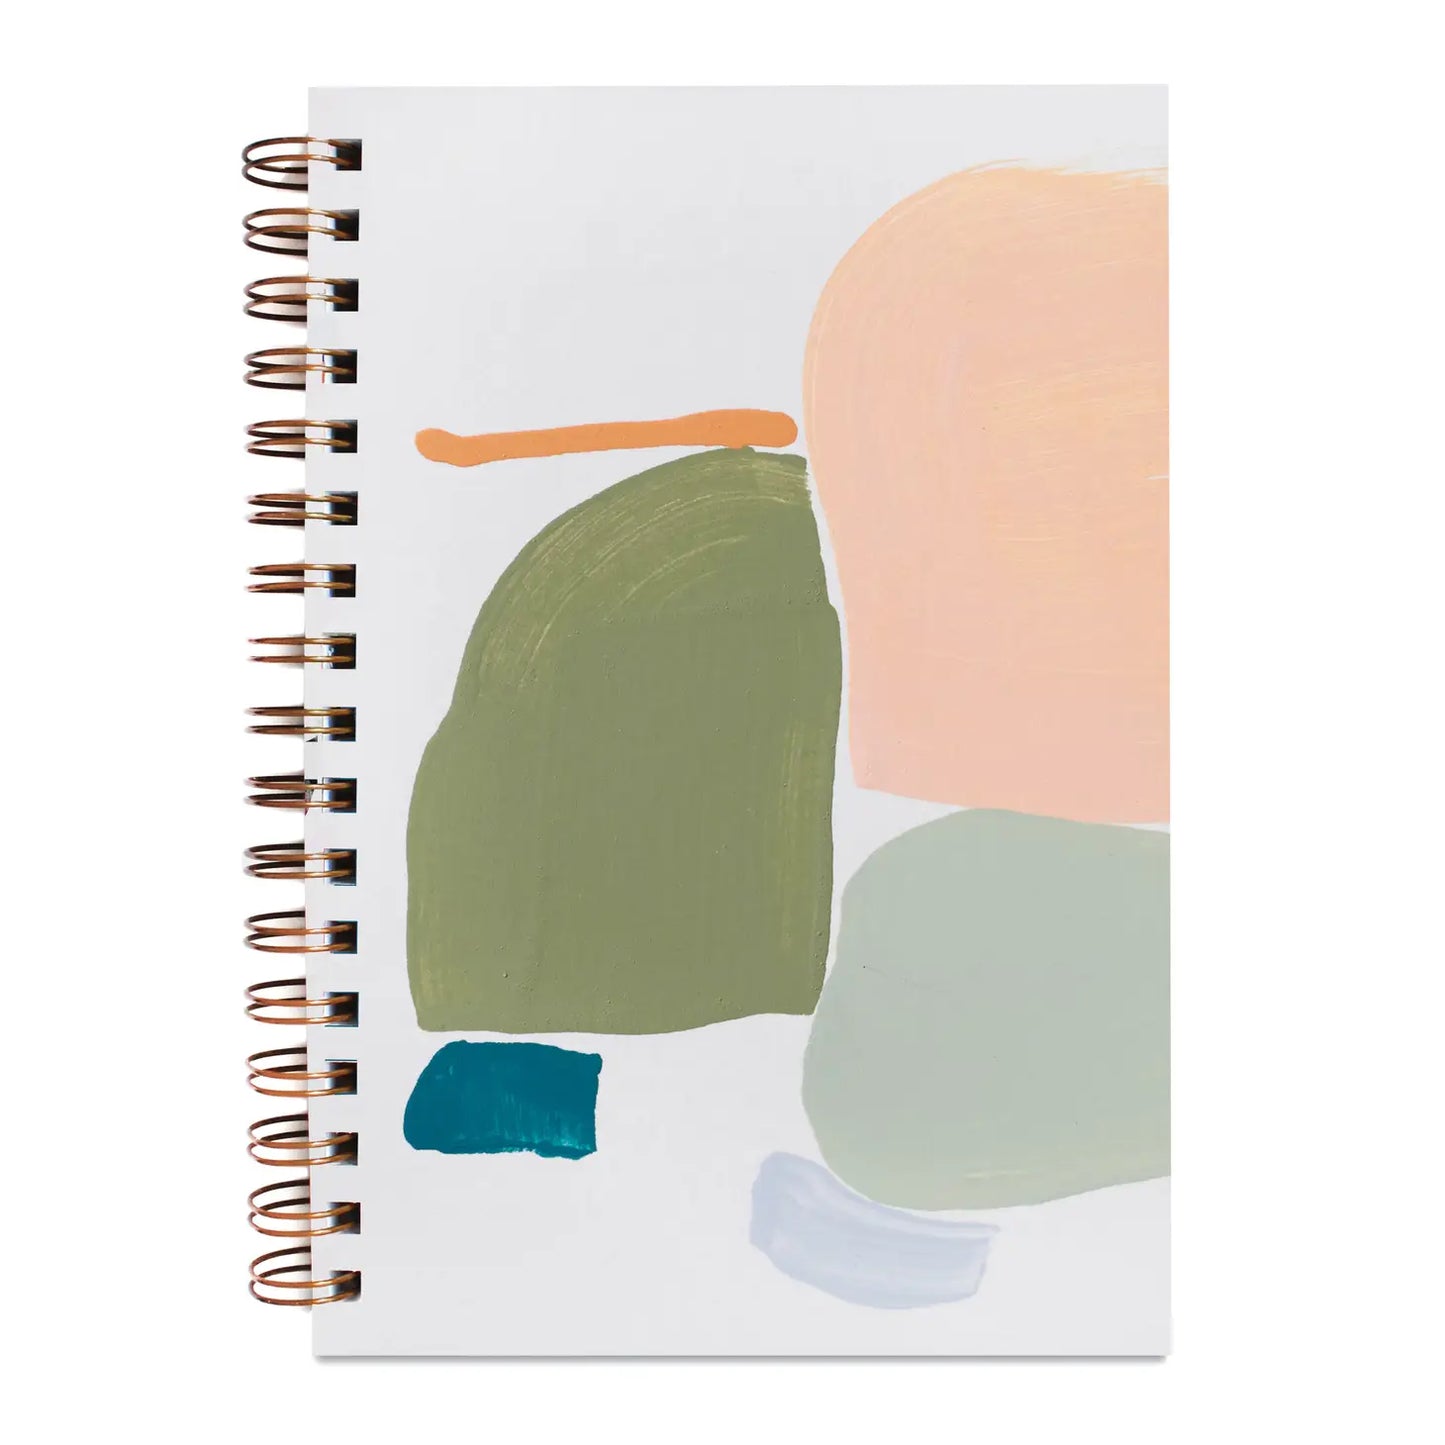 Painted Notebook